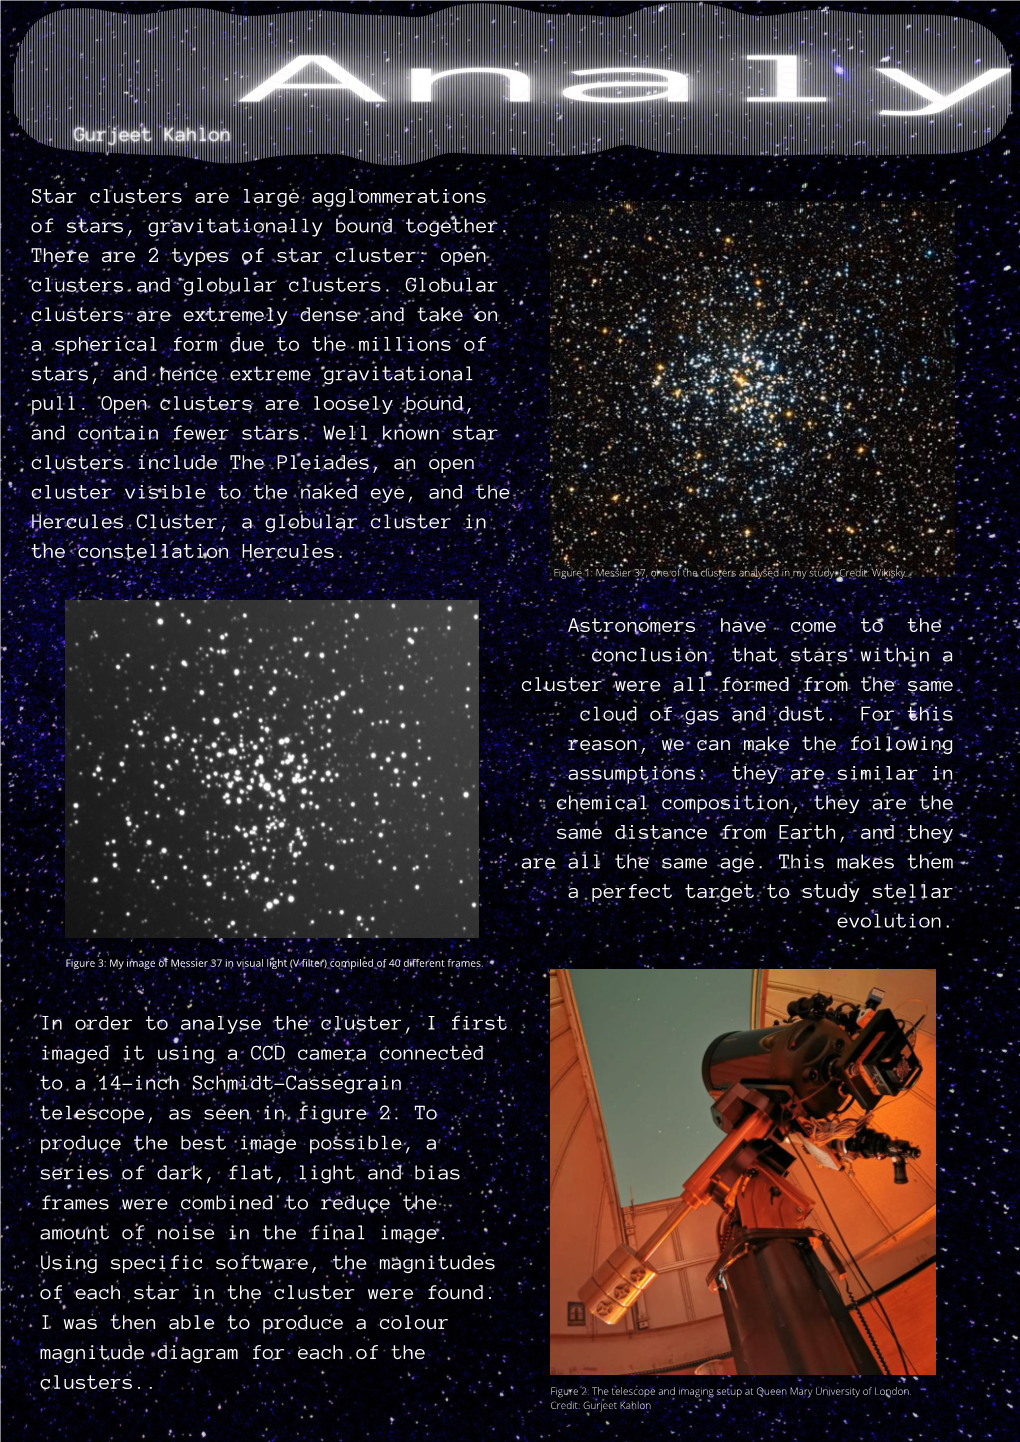 Star Clusters Are Large Agglommerations of Stars, Gravitationally Bound Together